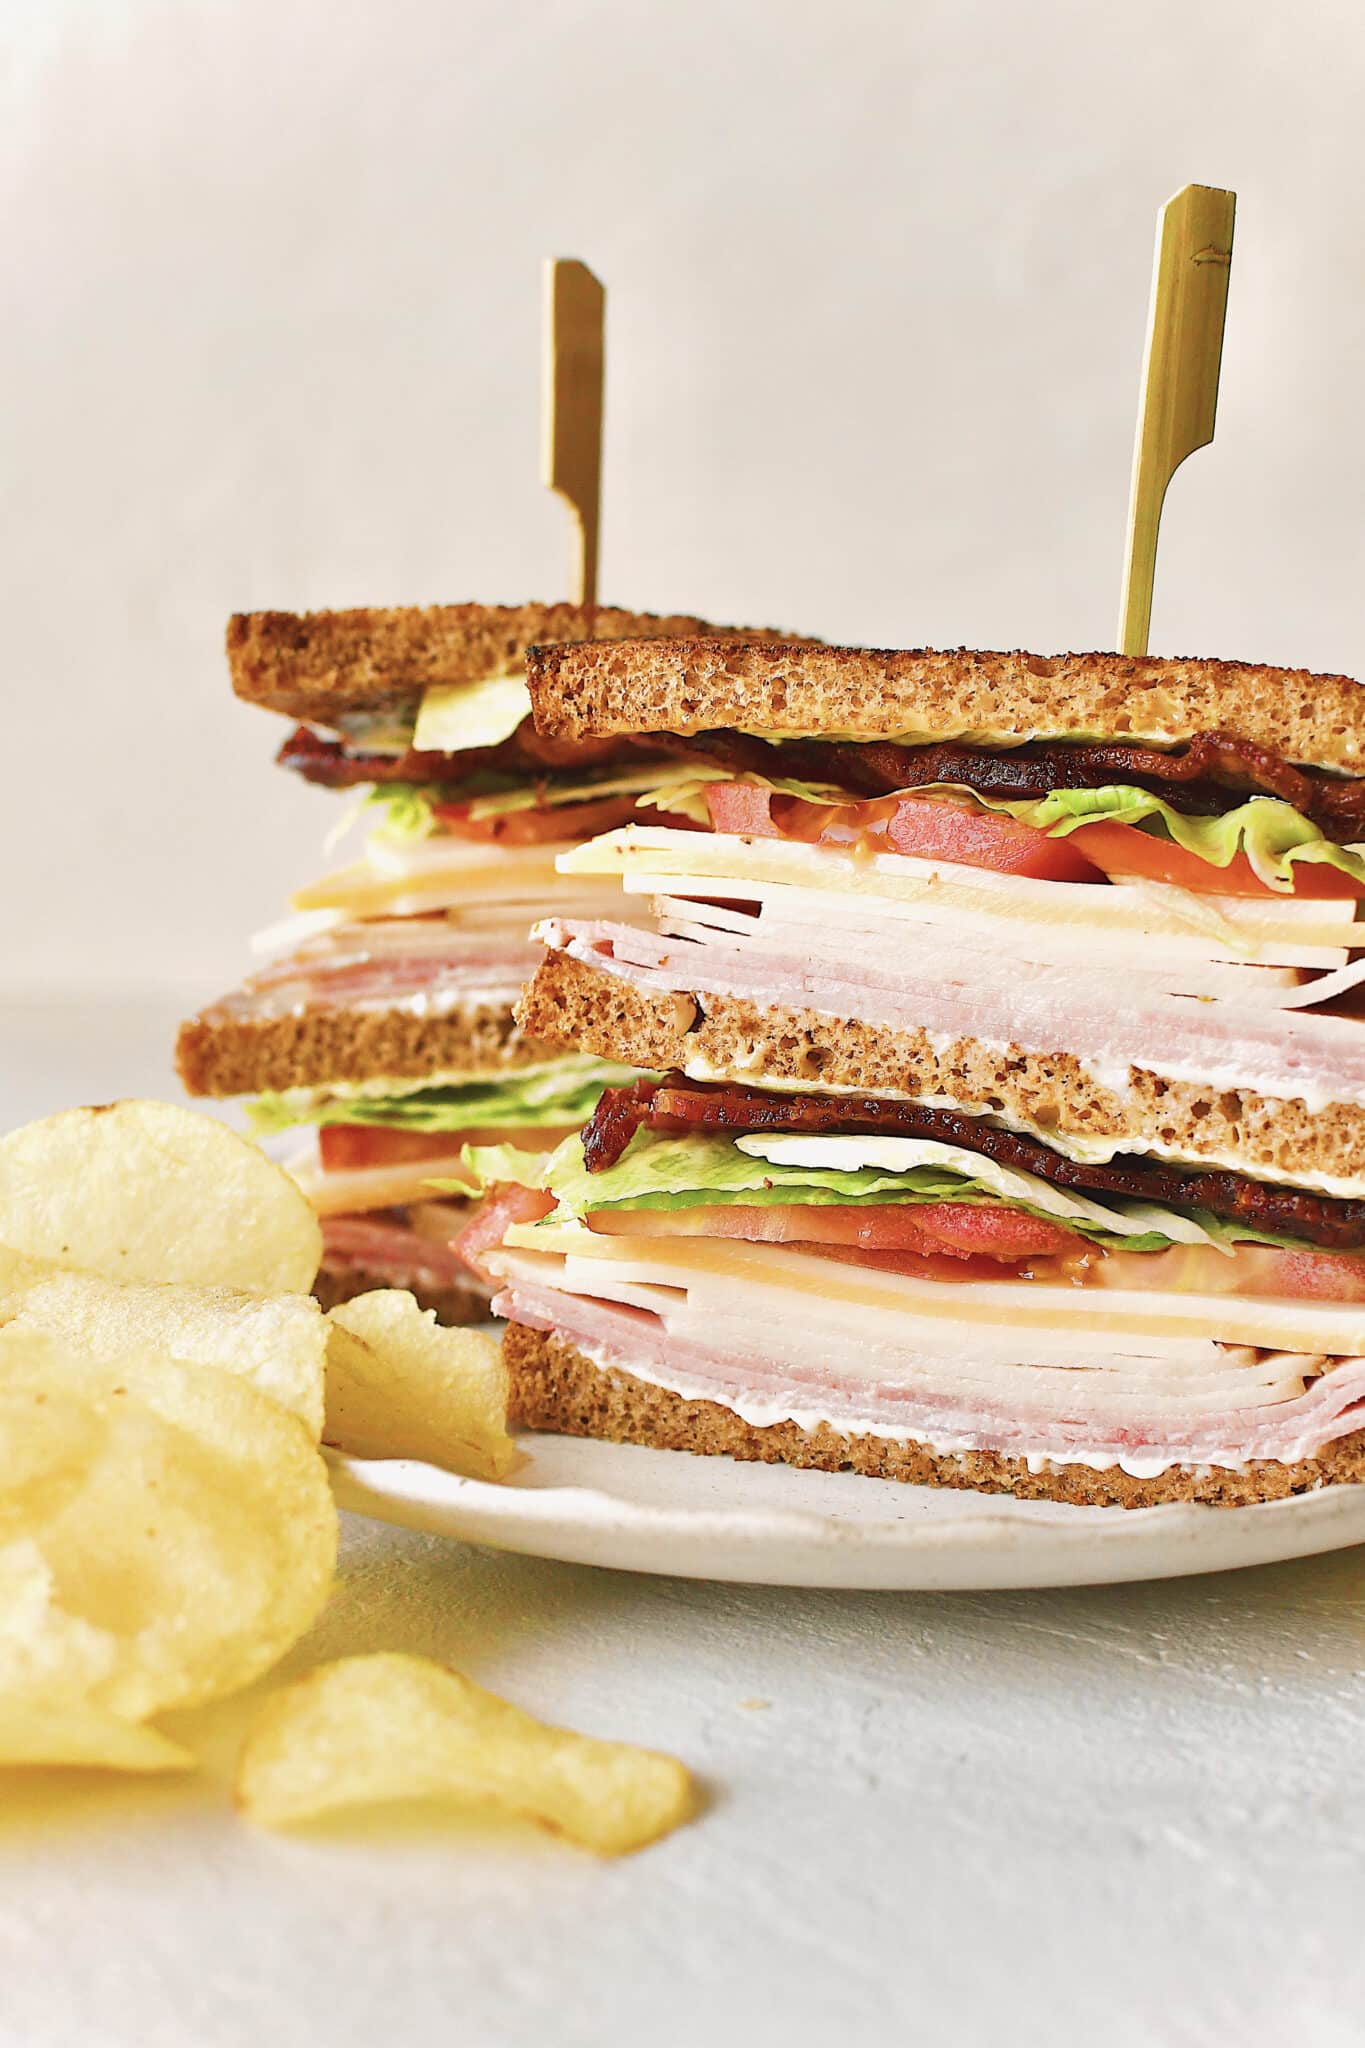 Double Decker Club Sandwich Recipe on a plate with chips.